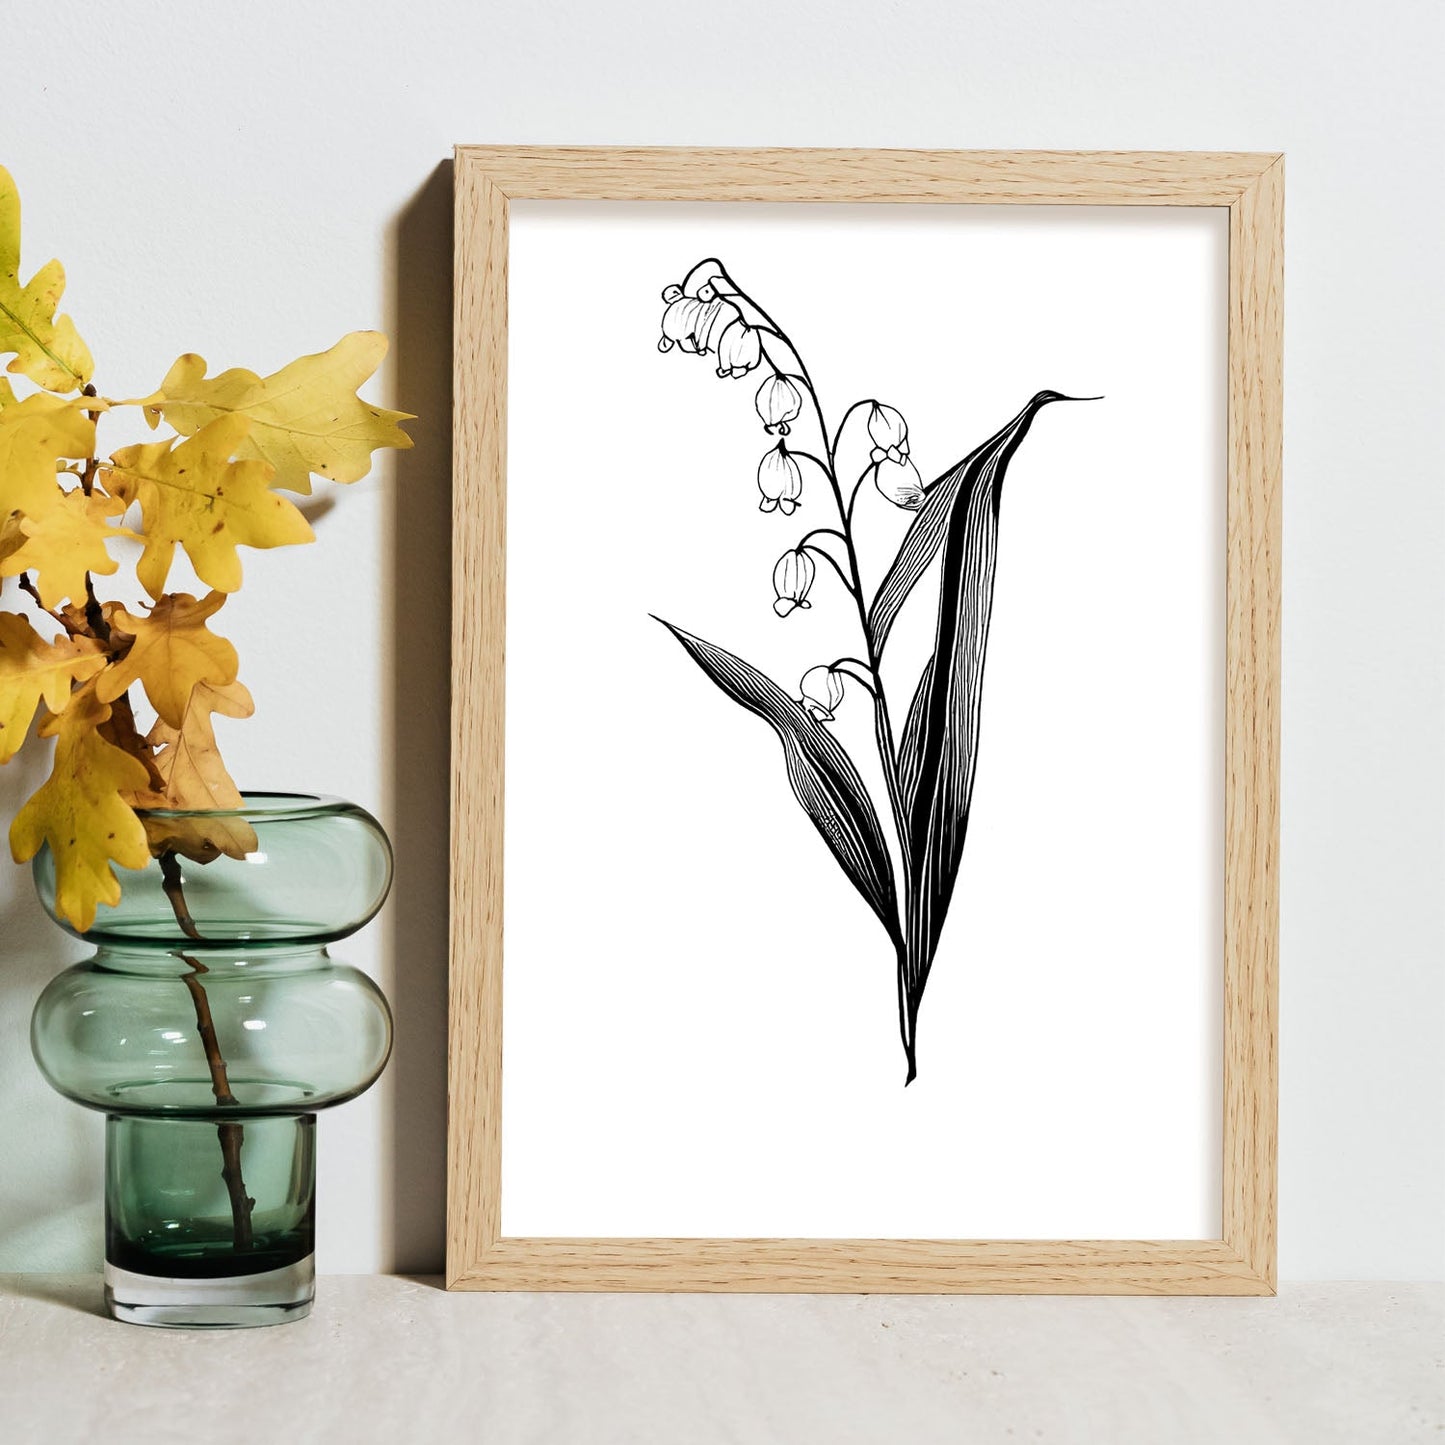 Nacnic Lily of the valley Minimalist Line Art. Aesthetic Wall Art Prints for Bedroom or Living Room Design.